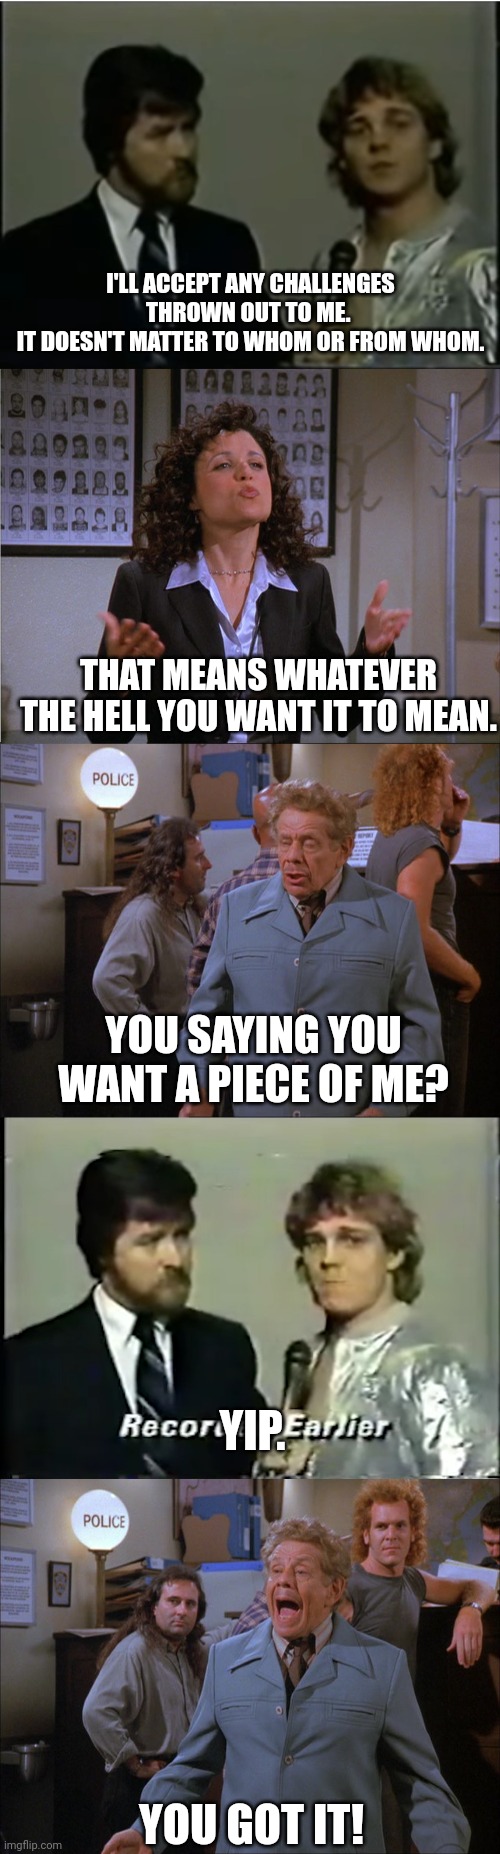 Seinfeld Wrestleposting | I'LL ACCEPT ANY CHALLENGES THROWN OUT TO ME. 
IT DOESN'T MATTER TO WHOM OR FROM WHOM. THAT MEANS WHATEVER THE HELL YOU WANT IT TO MEAN. YOU SAYING YOU WANT A PIECE OF ME? YIP. YOU GOT IT! | image tagged in seinfeld | made w/ Imgflip meme maker